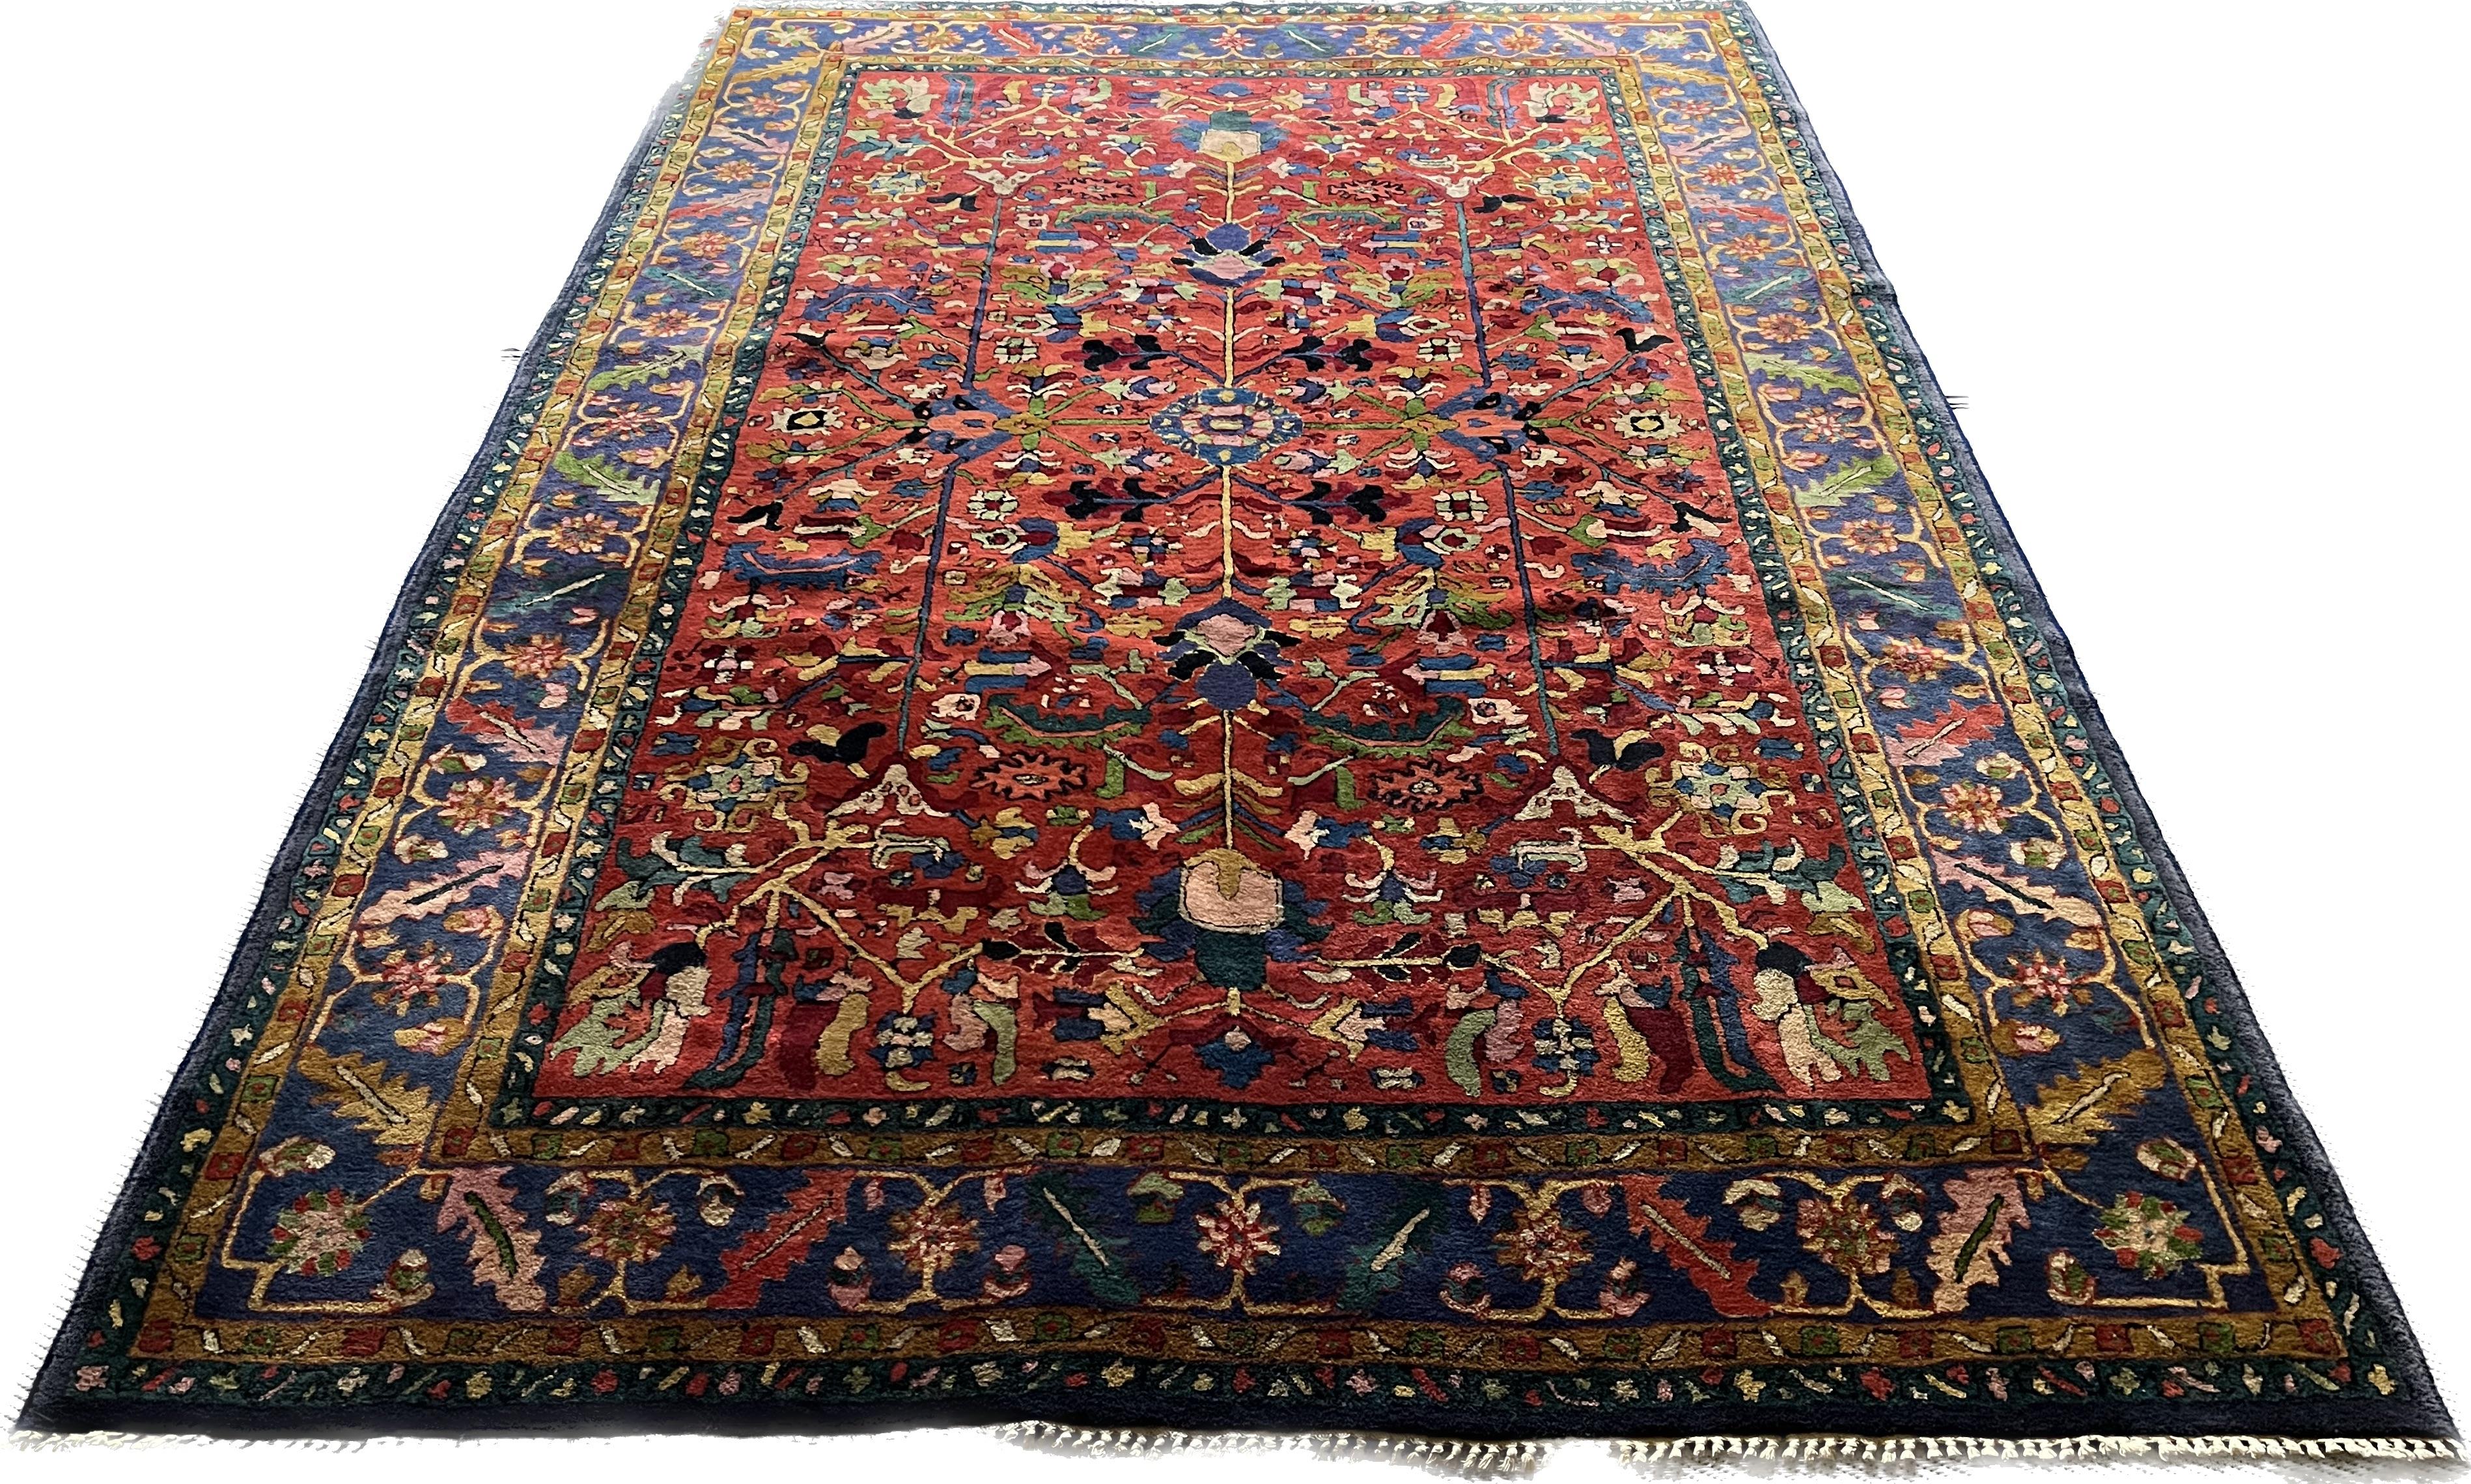 “Hériz Sérapi Design Crocheted Tetex Rug”
German-made Crocheted Tetex Rug, Hériz Sérapi Design. Mid 20th century

Heriz Sérapi designer rug antique shiny without central medallion with geometric pattern.
This charming rug features an open design 